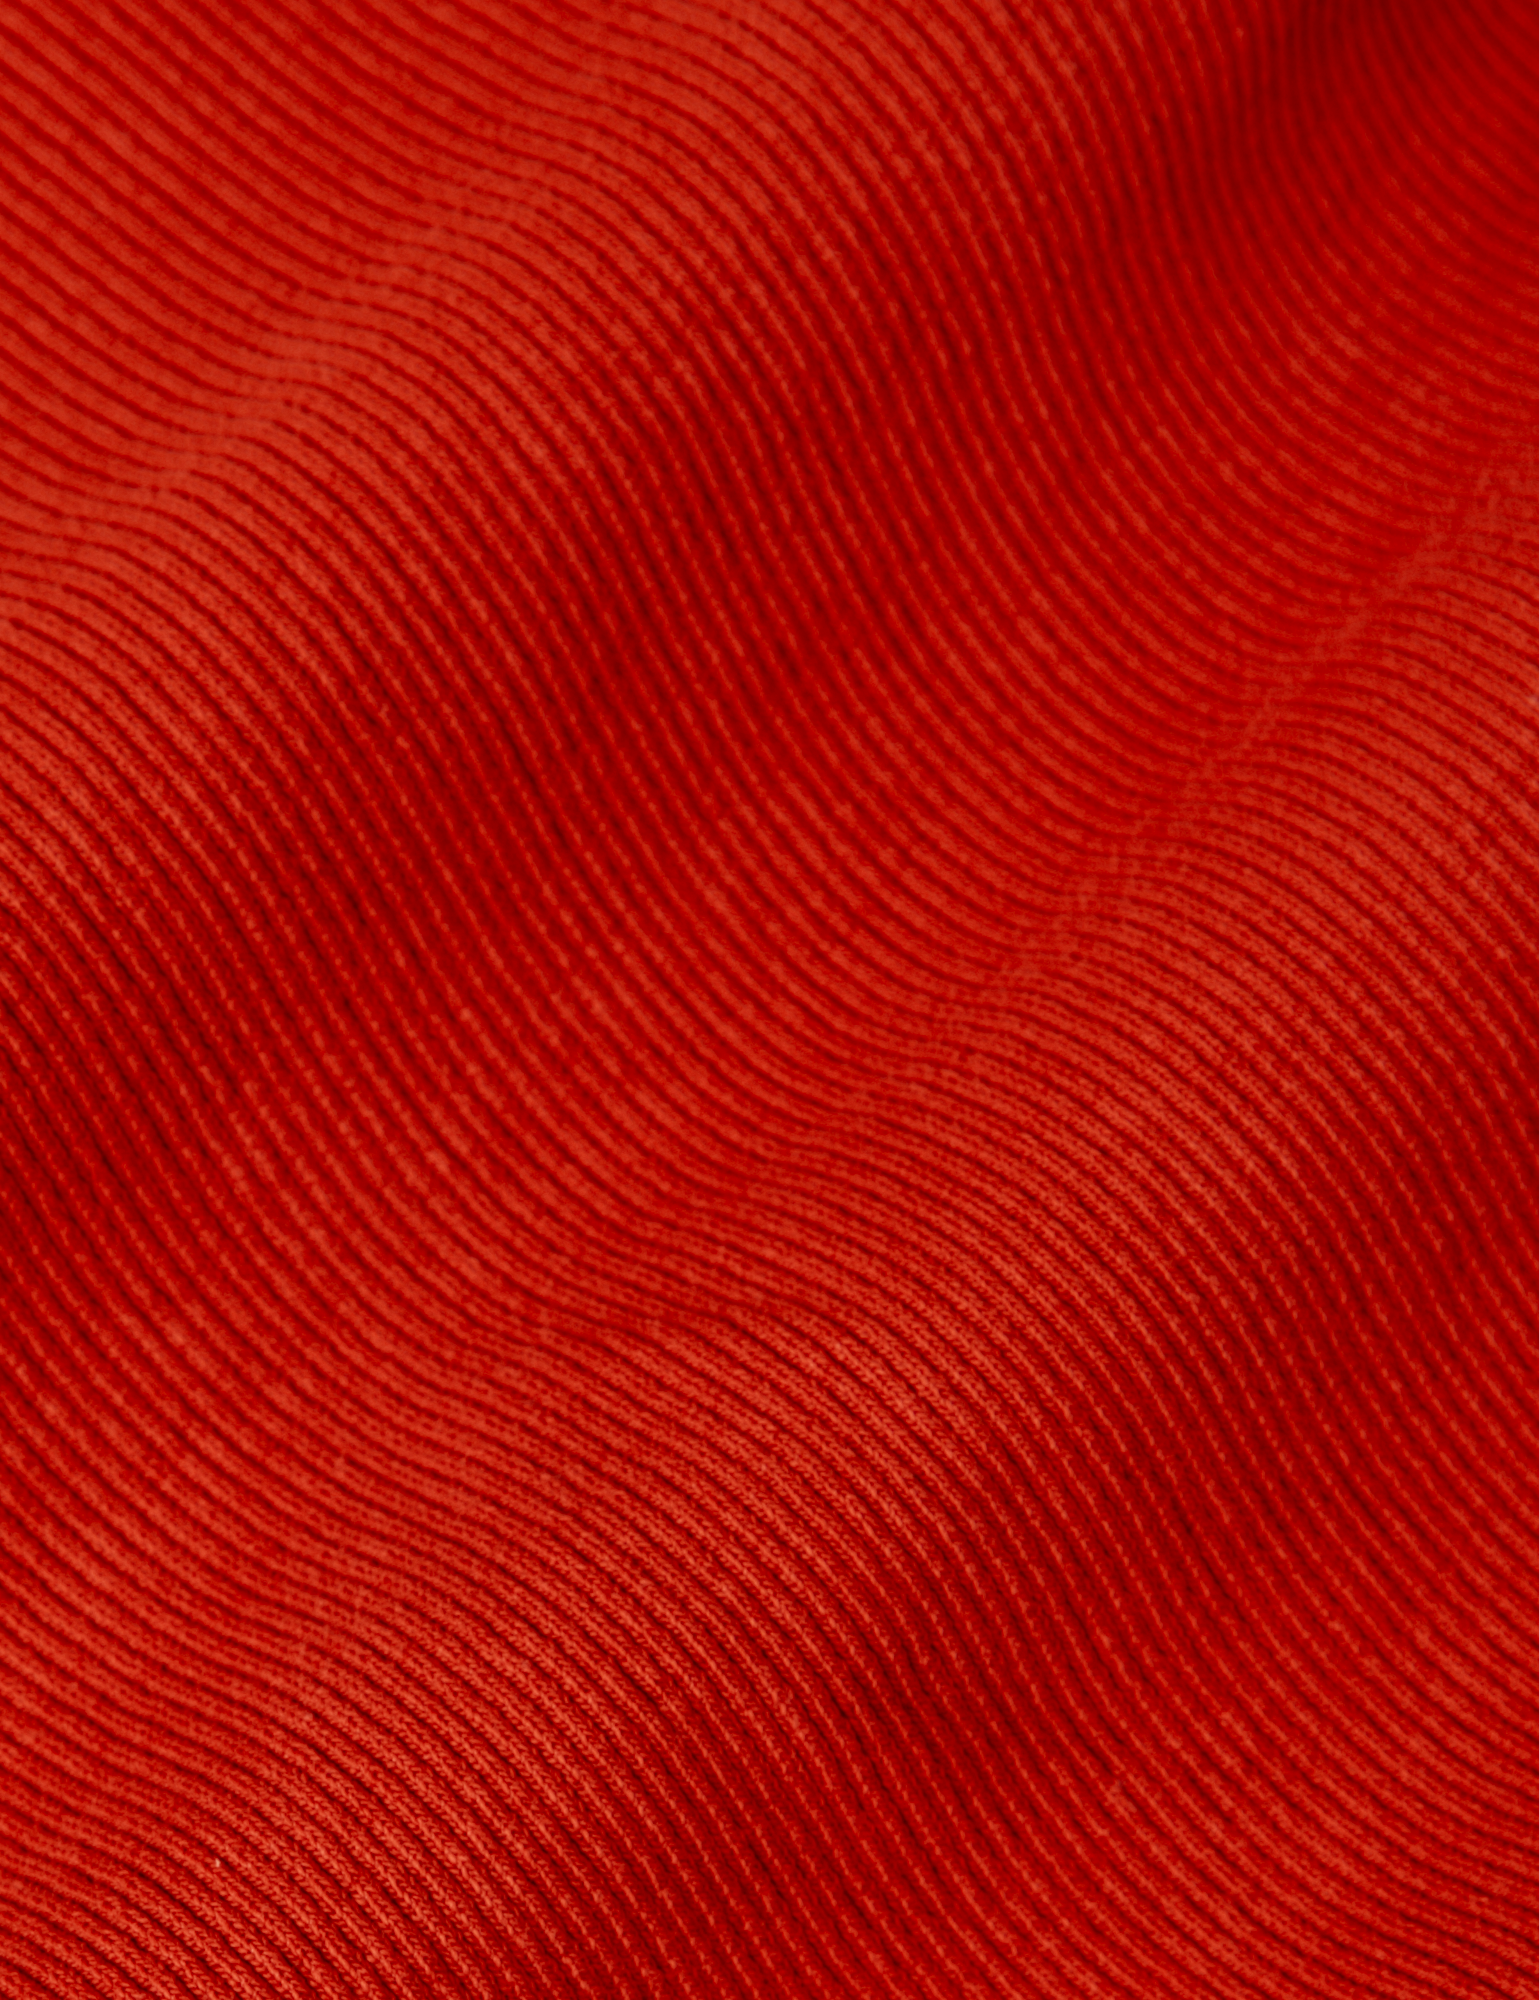 Essential Turtleneck in Paprika on fabric